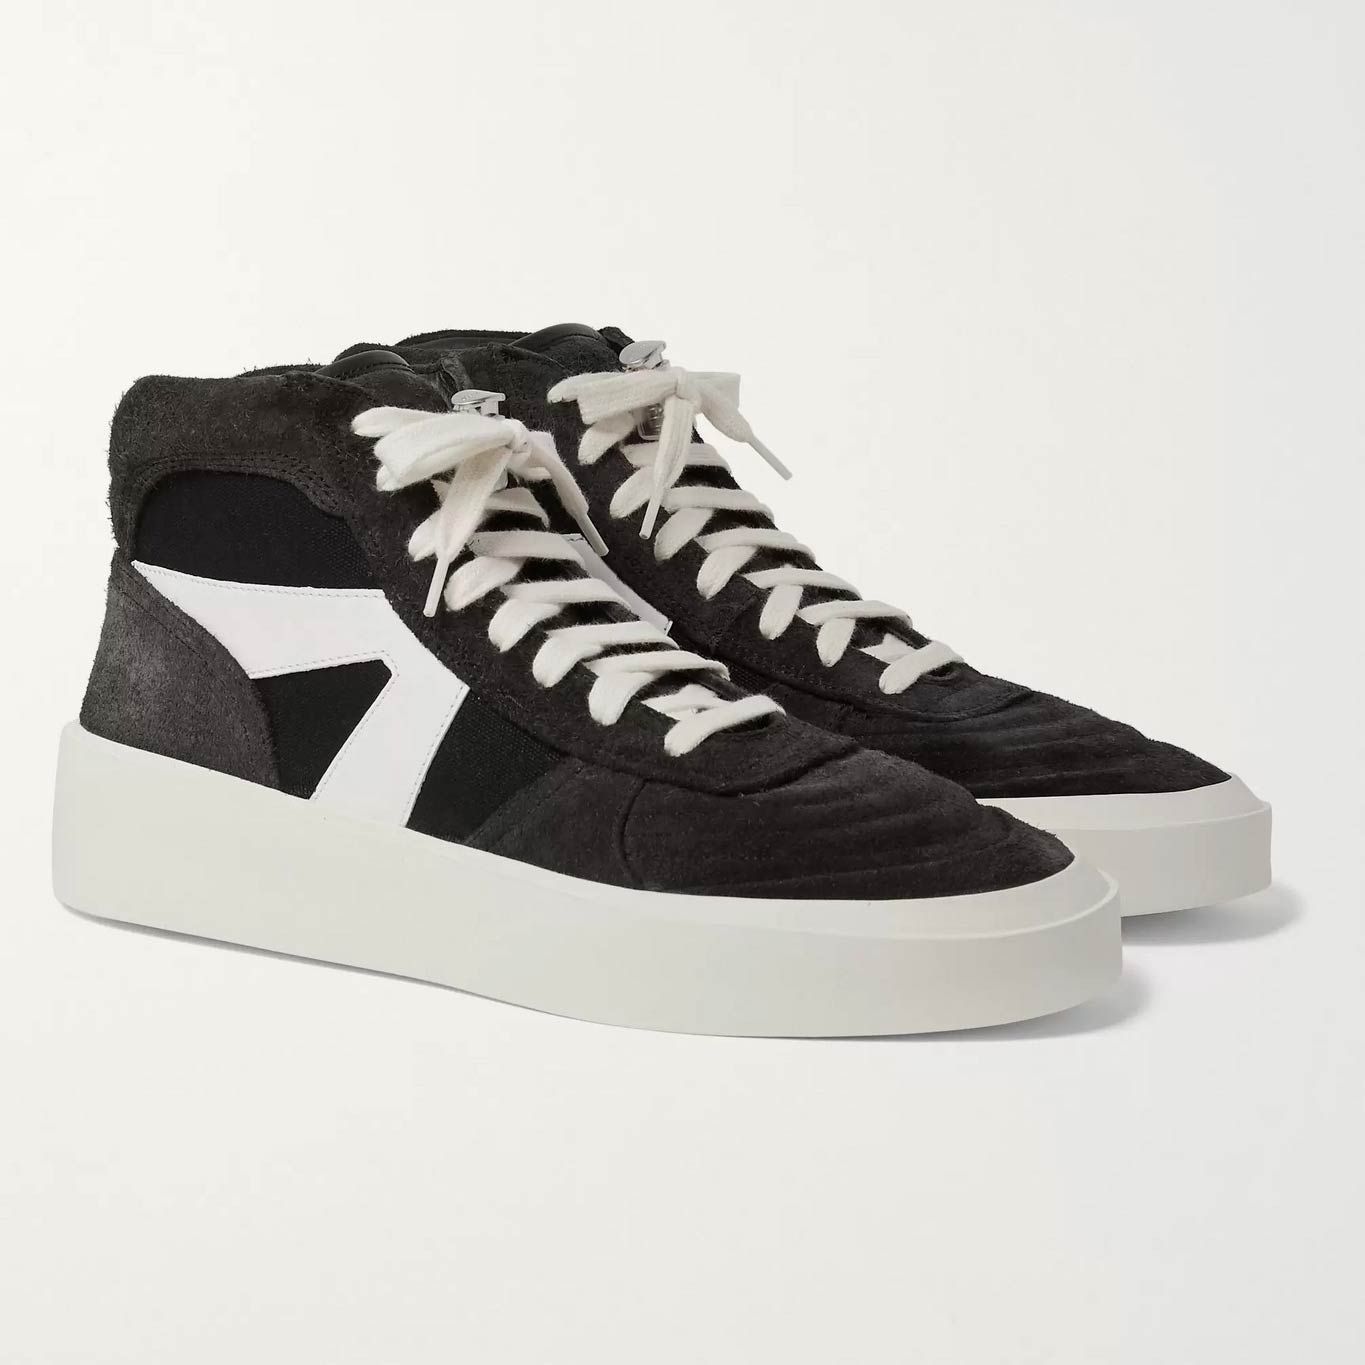 Suede, Leather, and Canvas High-Top Sneakers